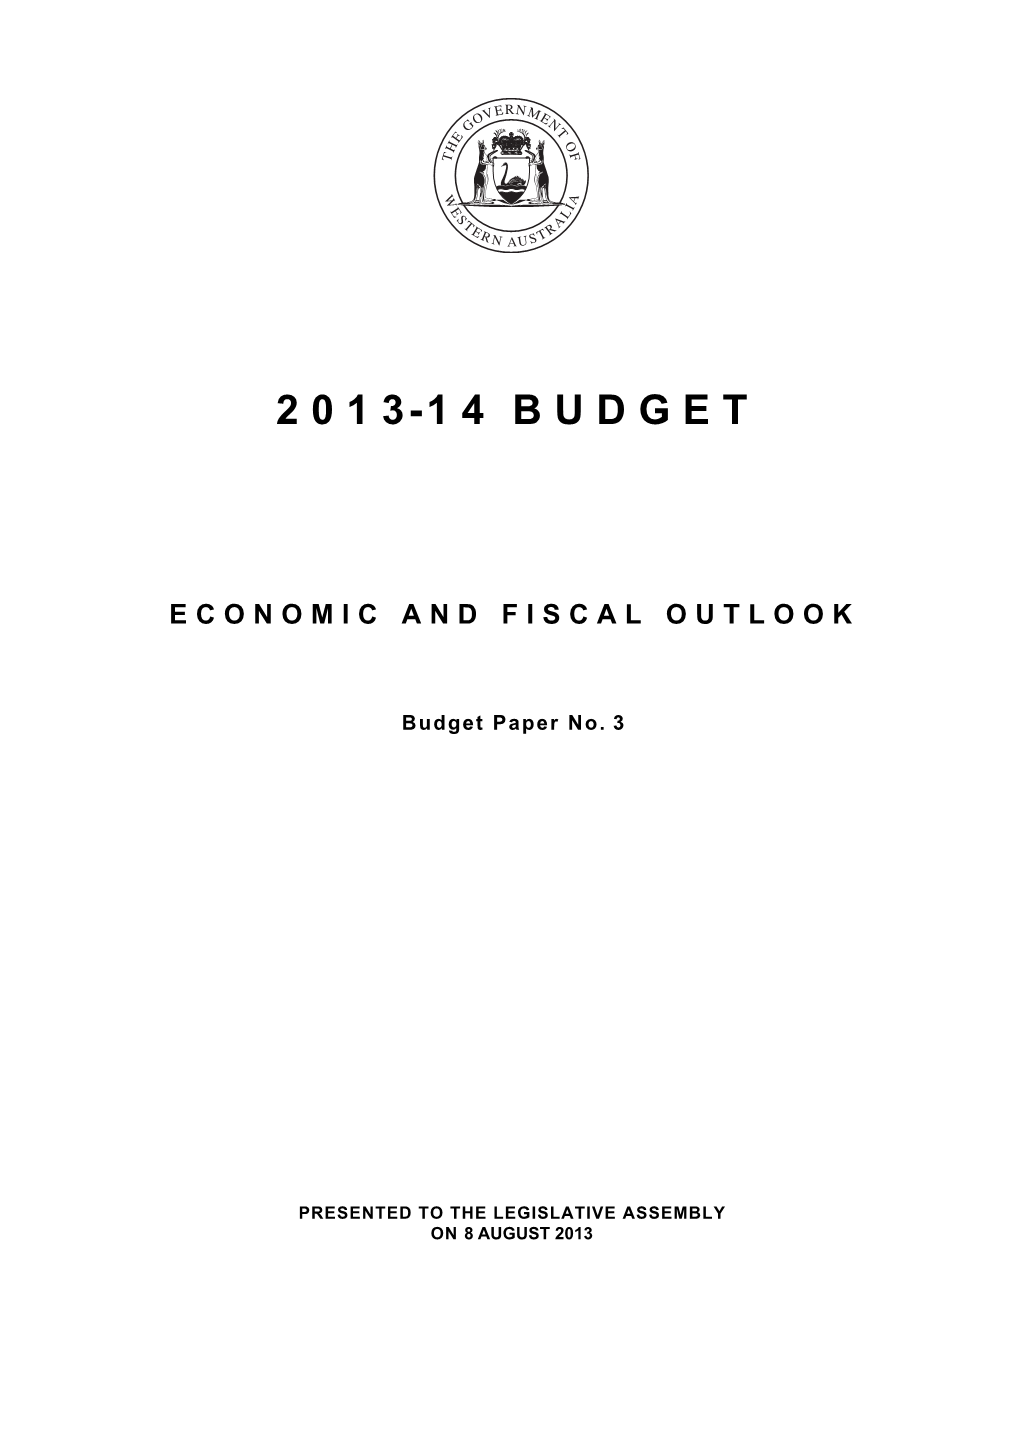 2013-14 Budget. Economic and Fiscal Outlook. Budget Paper No. 3